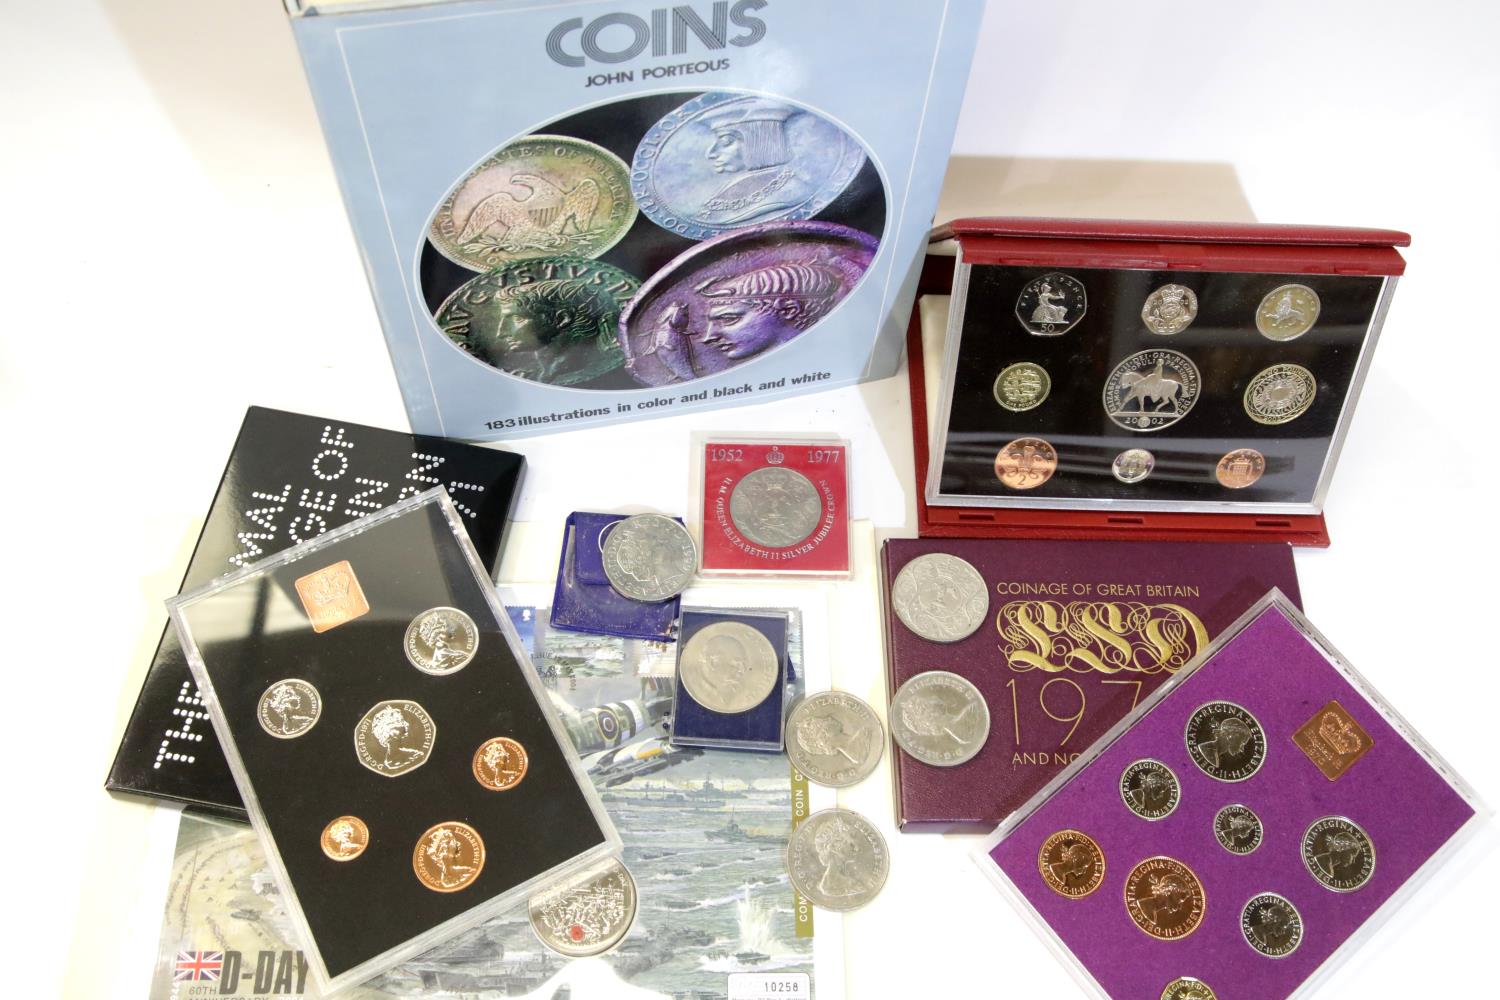 Collection of coins, boxed sets of 1970 (pre-decimalisation) & 1971 (decimalisation) coinage; 2002